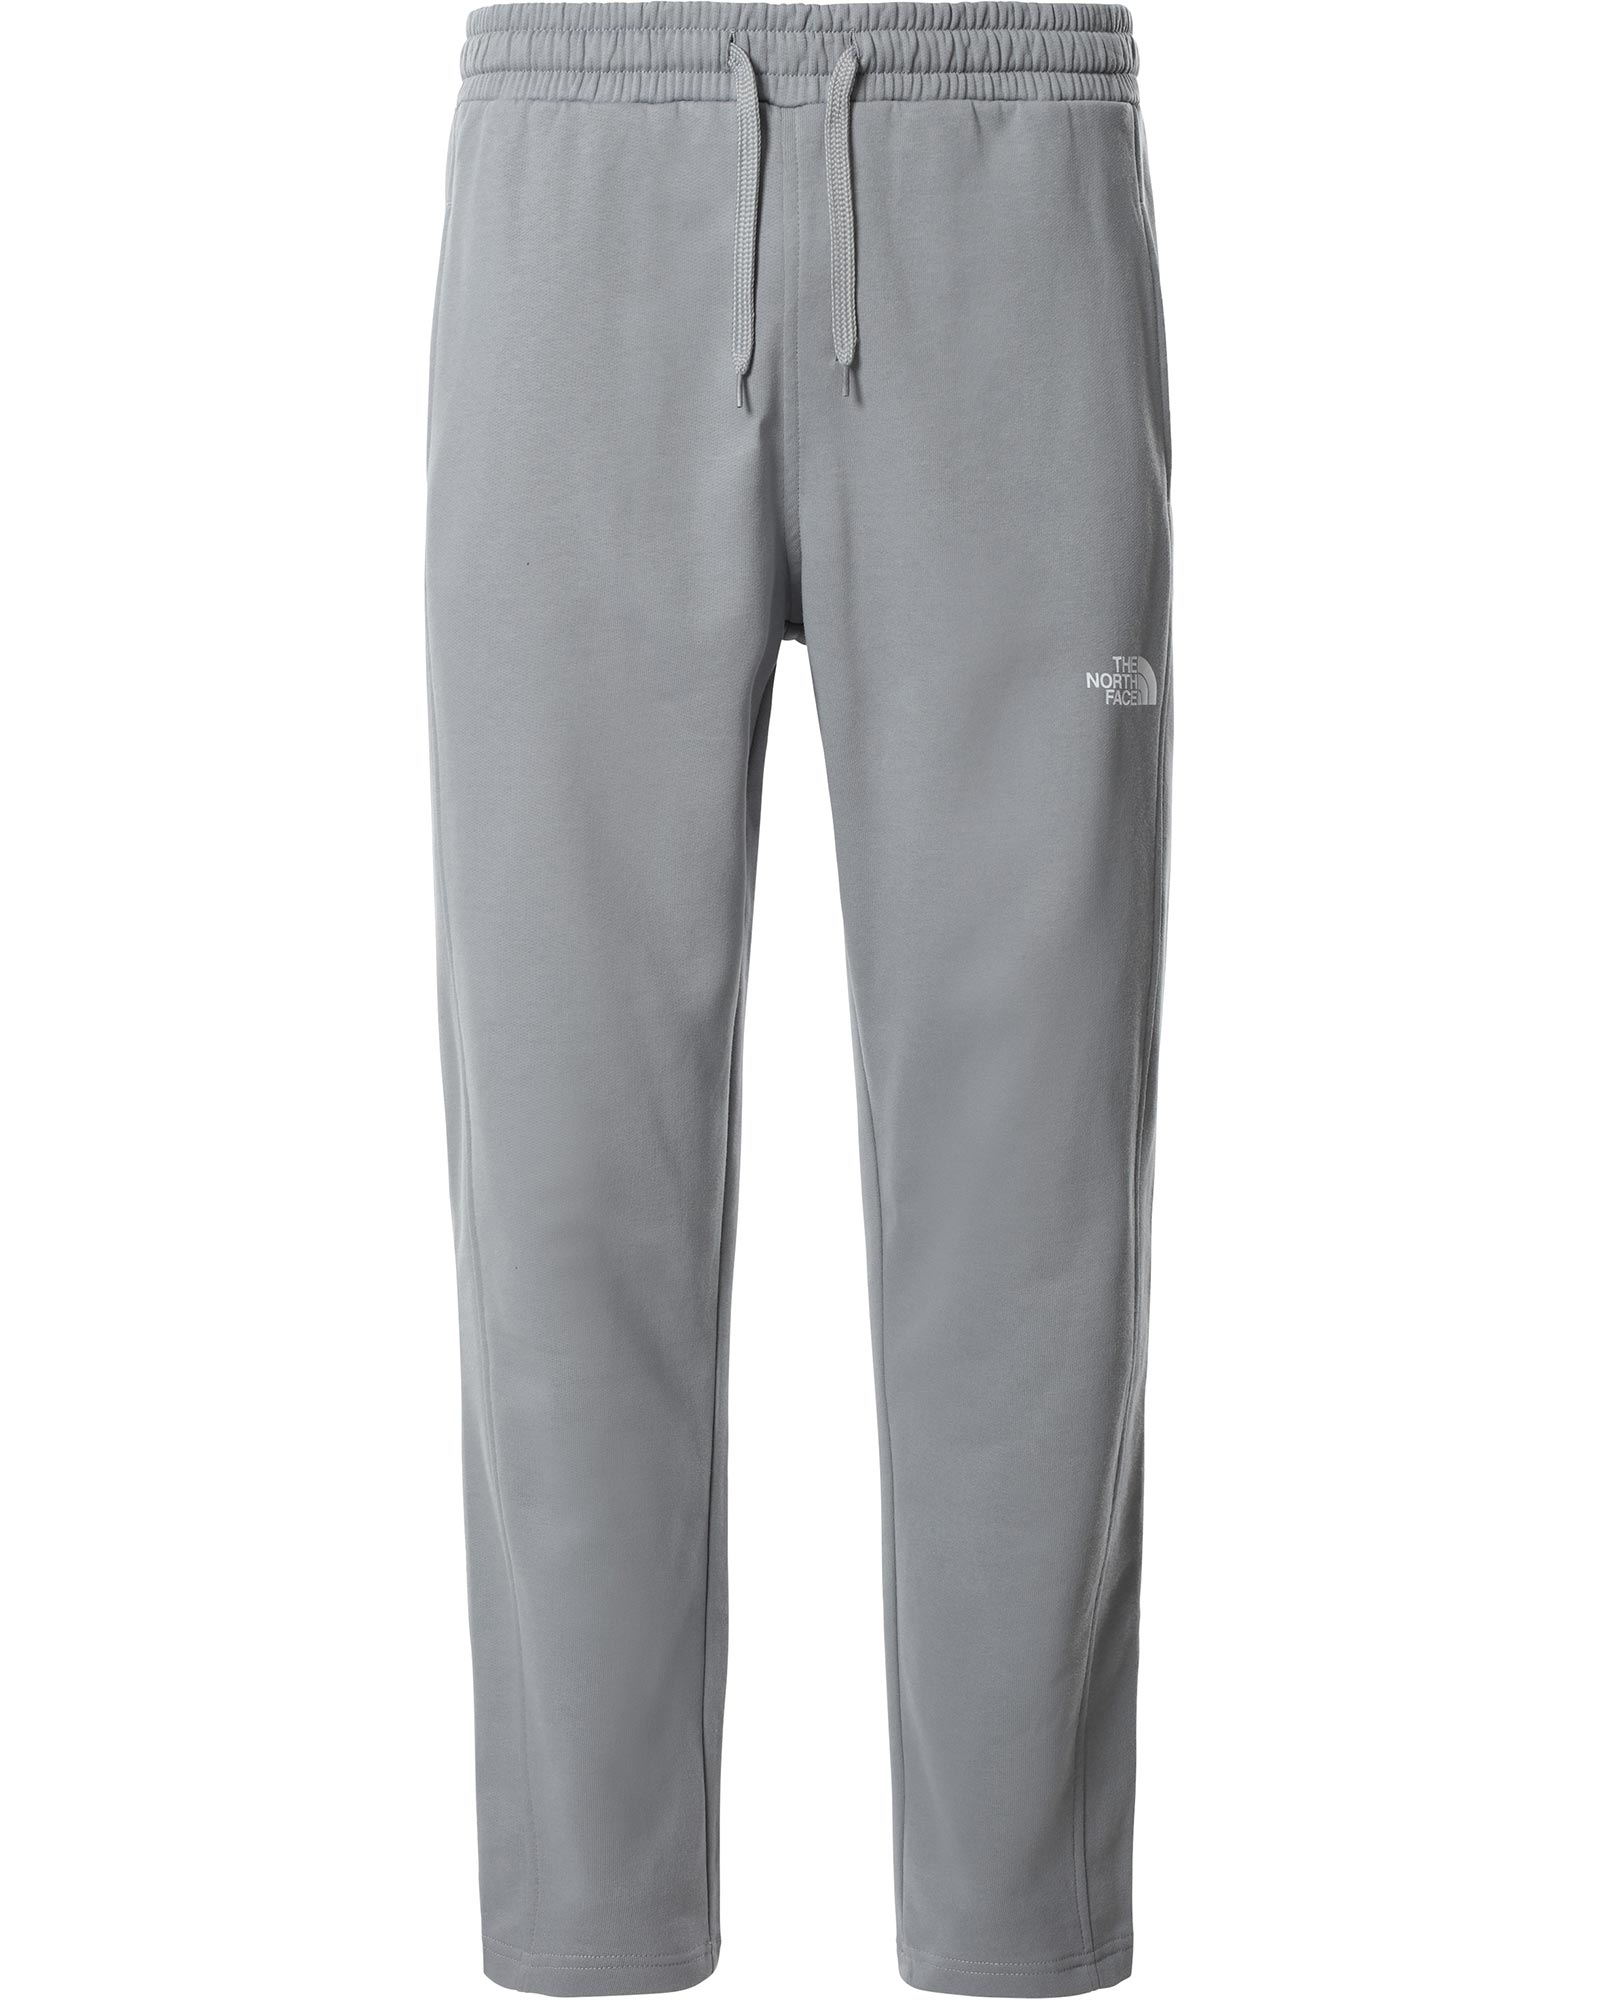 The North Face Standard Men’s Pants - Tradewinds Grey S